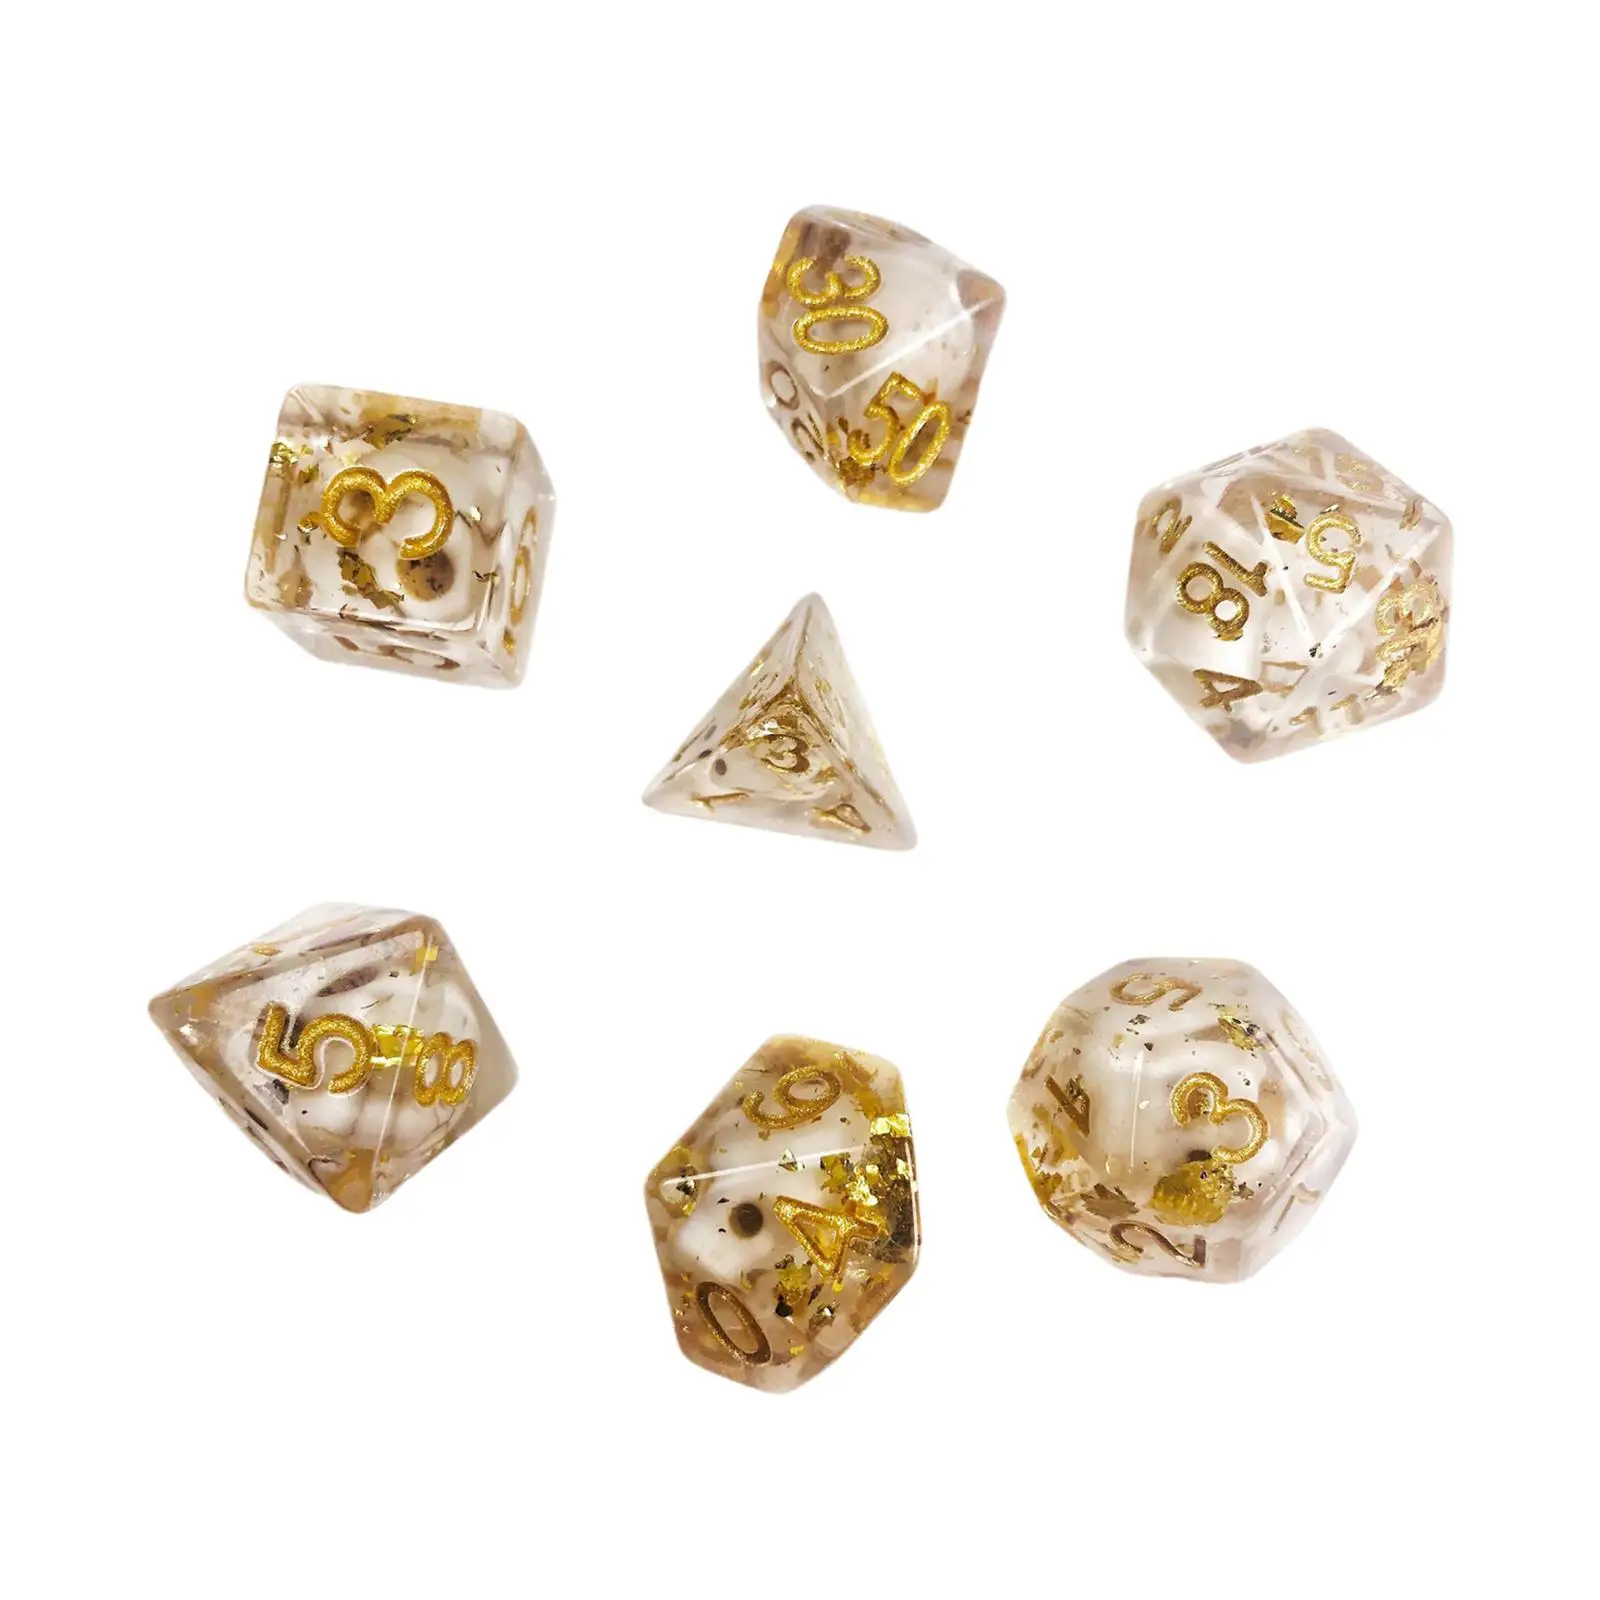 7 Pieces Acrylic Polyhedral Dices Built in Skull for Tabletop Game Role Play